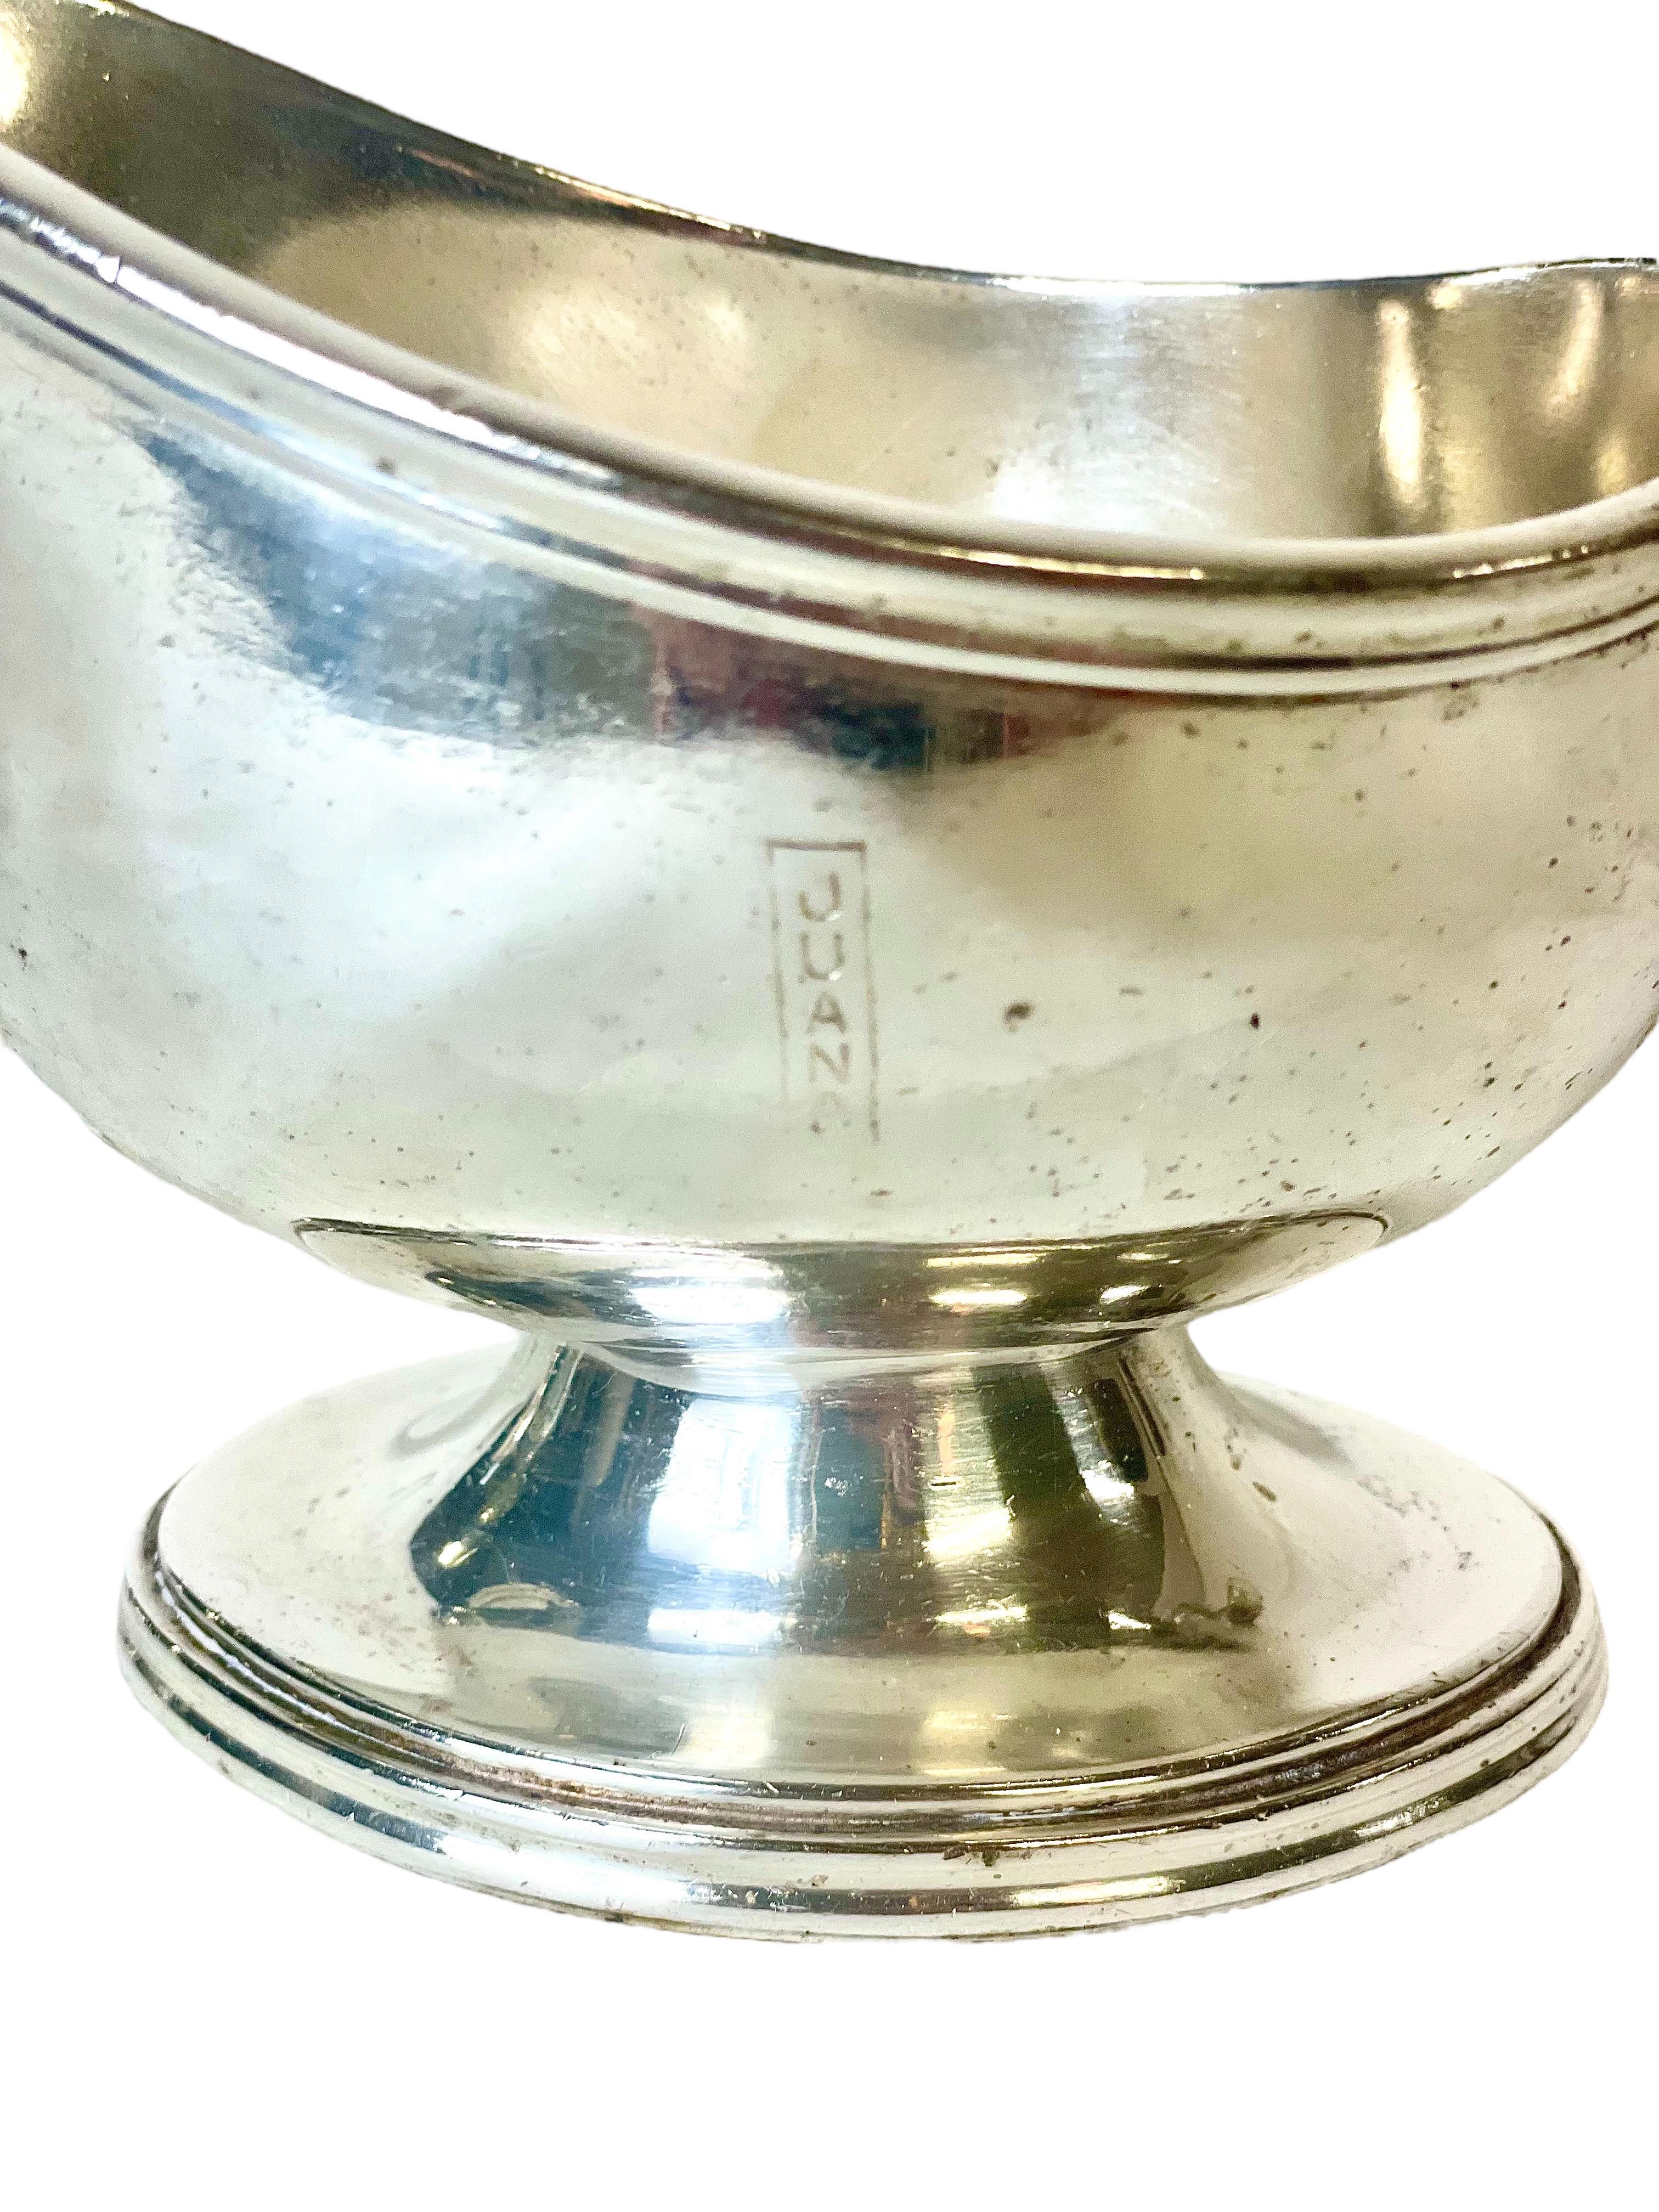 A handsome silver-plated sauce, or gravy, boat dating from around 1930, and featuring the engraved logo of the glamorous Hotel 'Juana' in Juan Les Pins, near Antibes. Stylish in design, with its circular base and wide pouring spout, it has been well